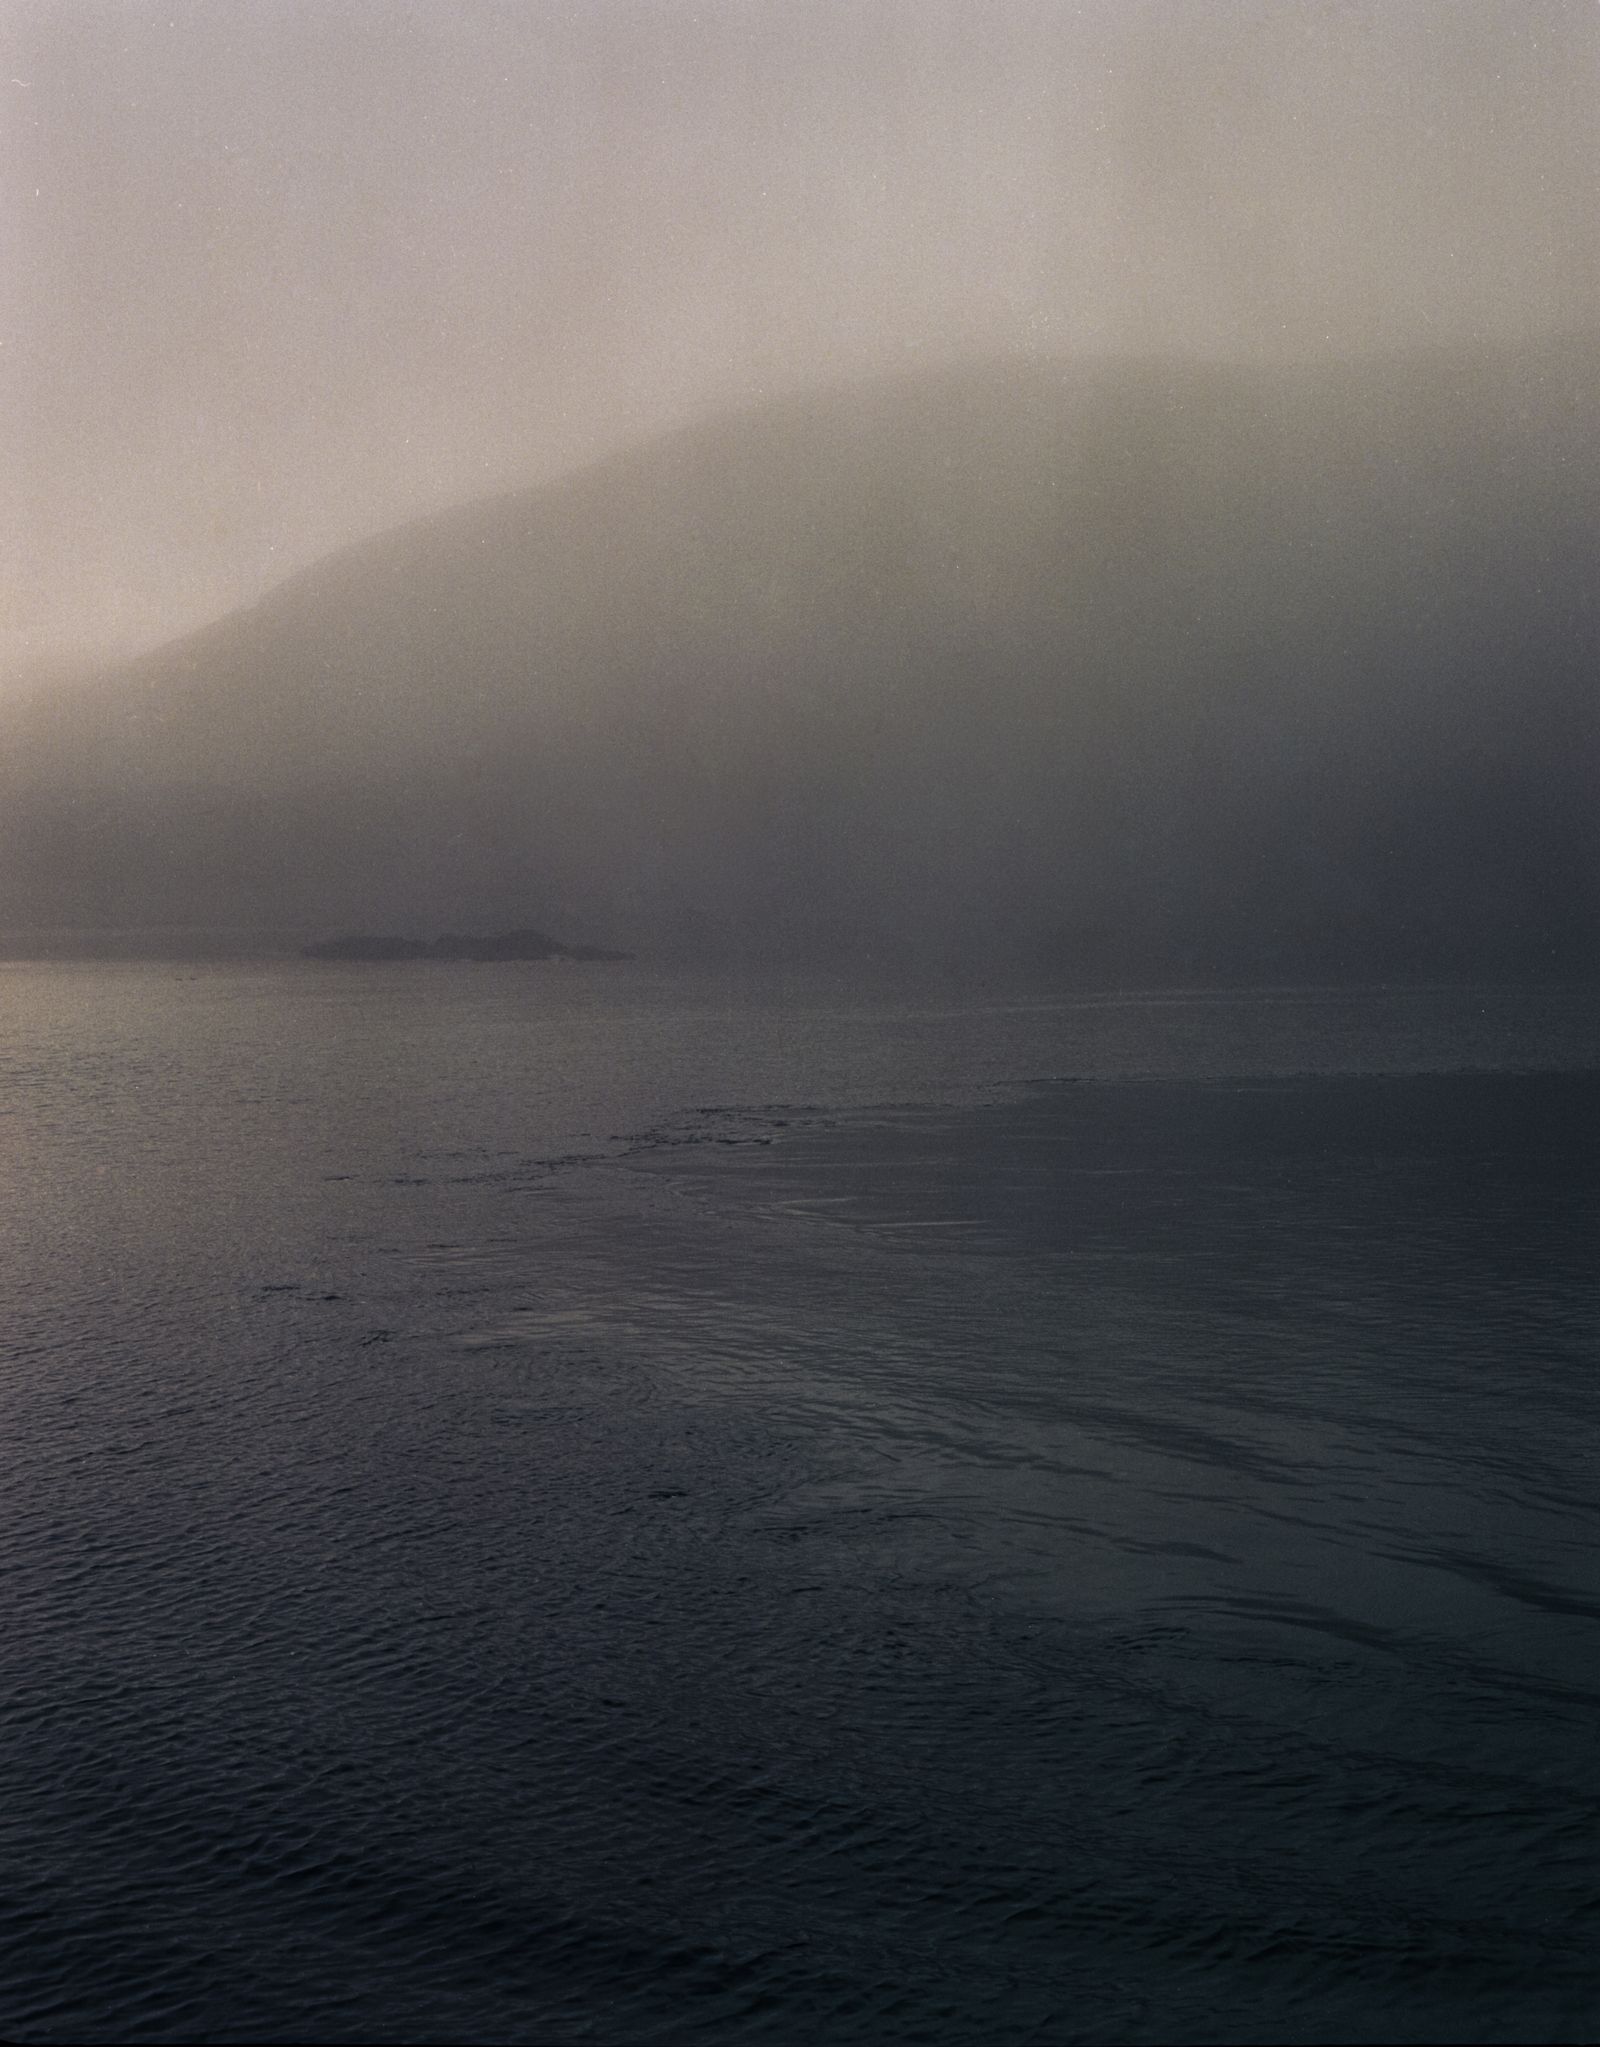 © Giulia Savorelli - Image from the the Sea is Land's Edge photography project